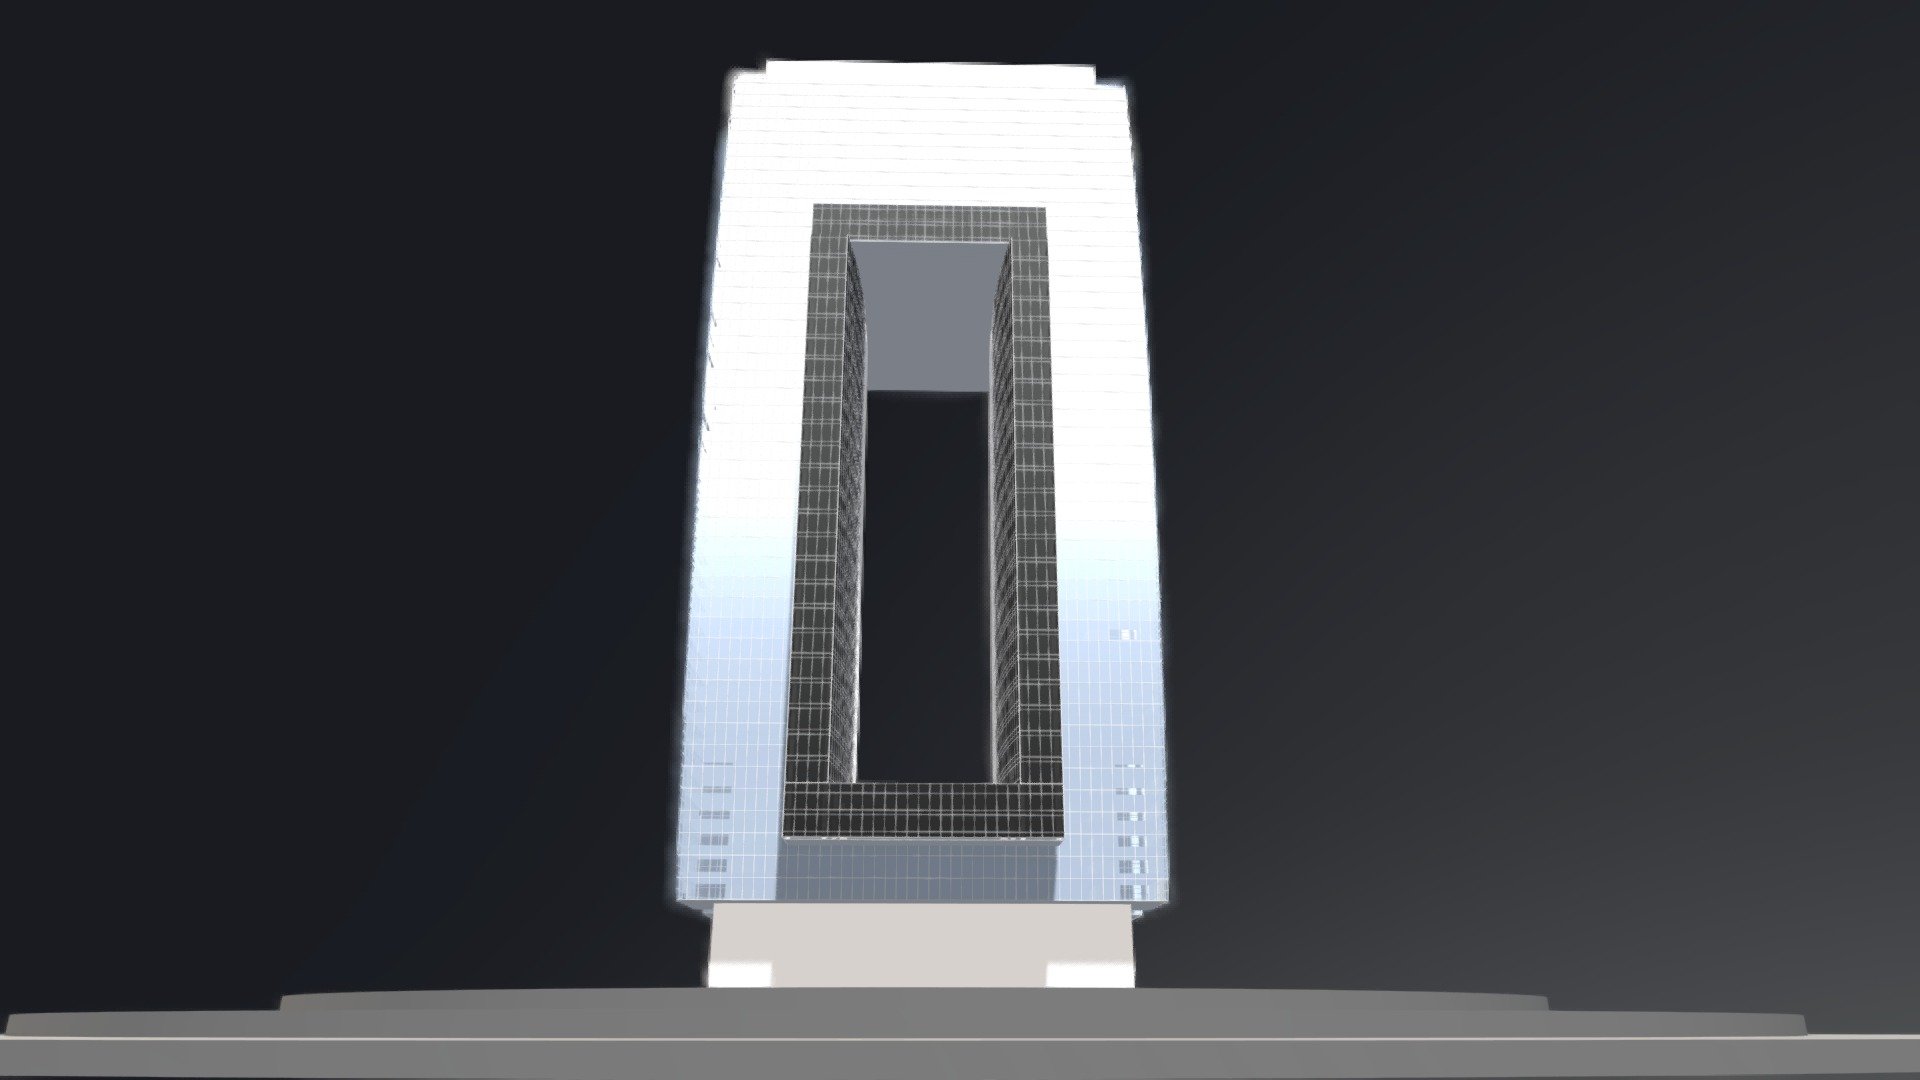 Tall building with large opening, not very functional but kinda cool looking.

The model is not fully complete, but hoping you can find some use for it still 3d model